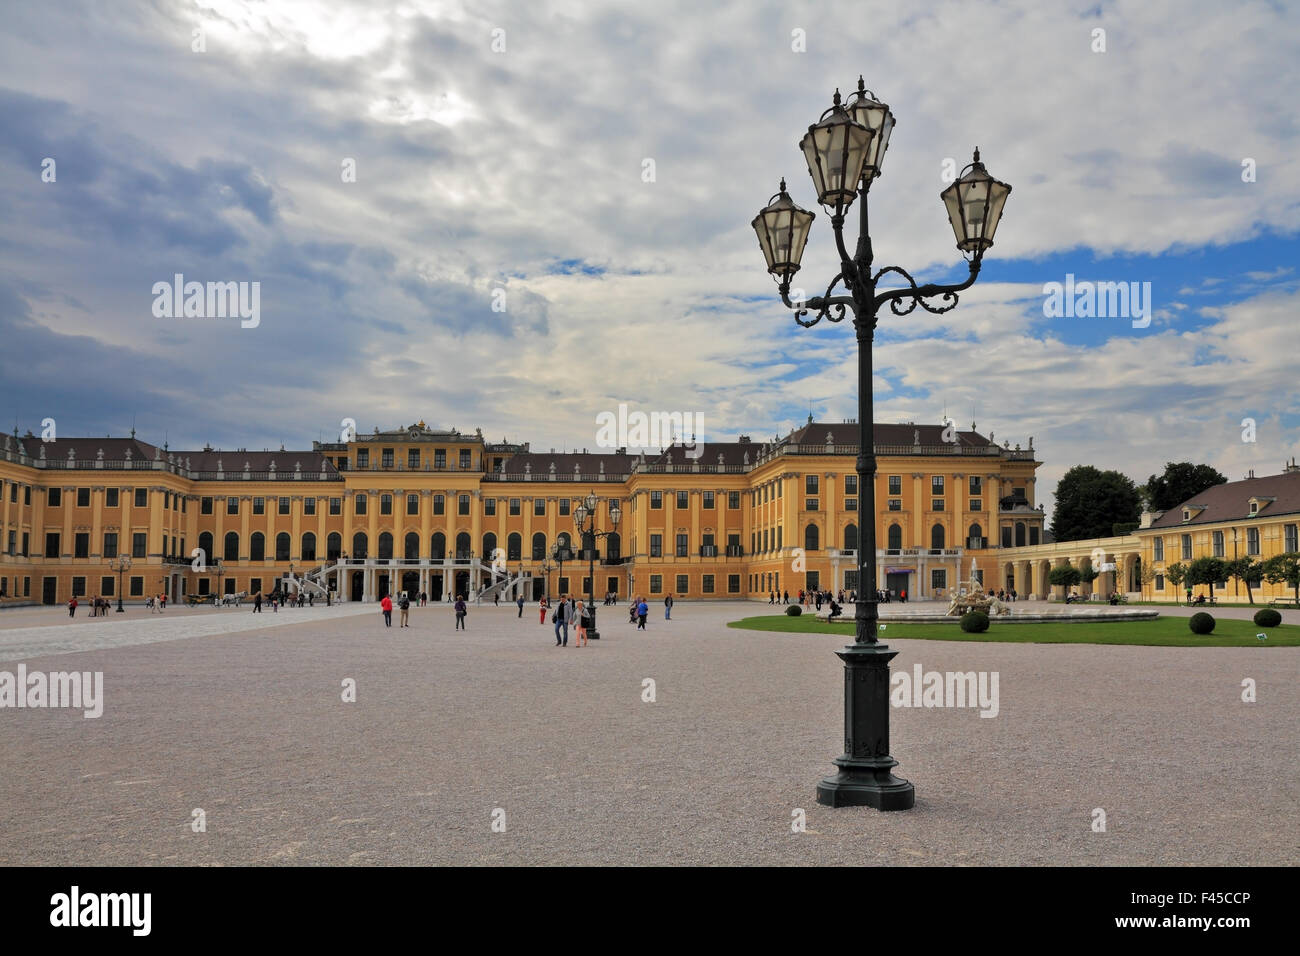 Palace and vintage lamps on a large area Stock Photo